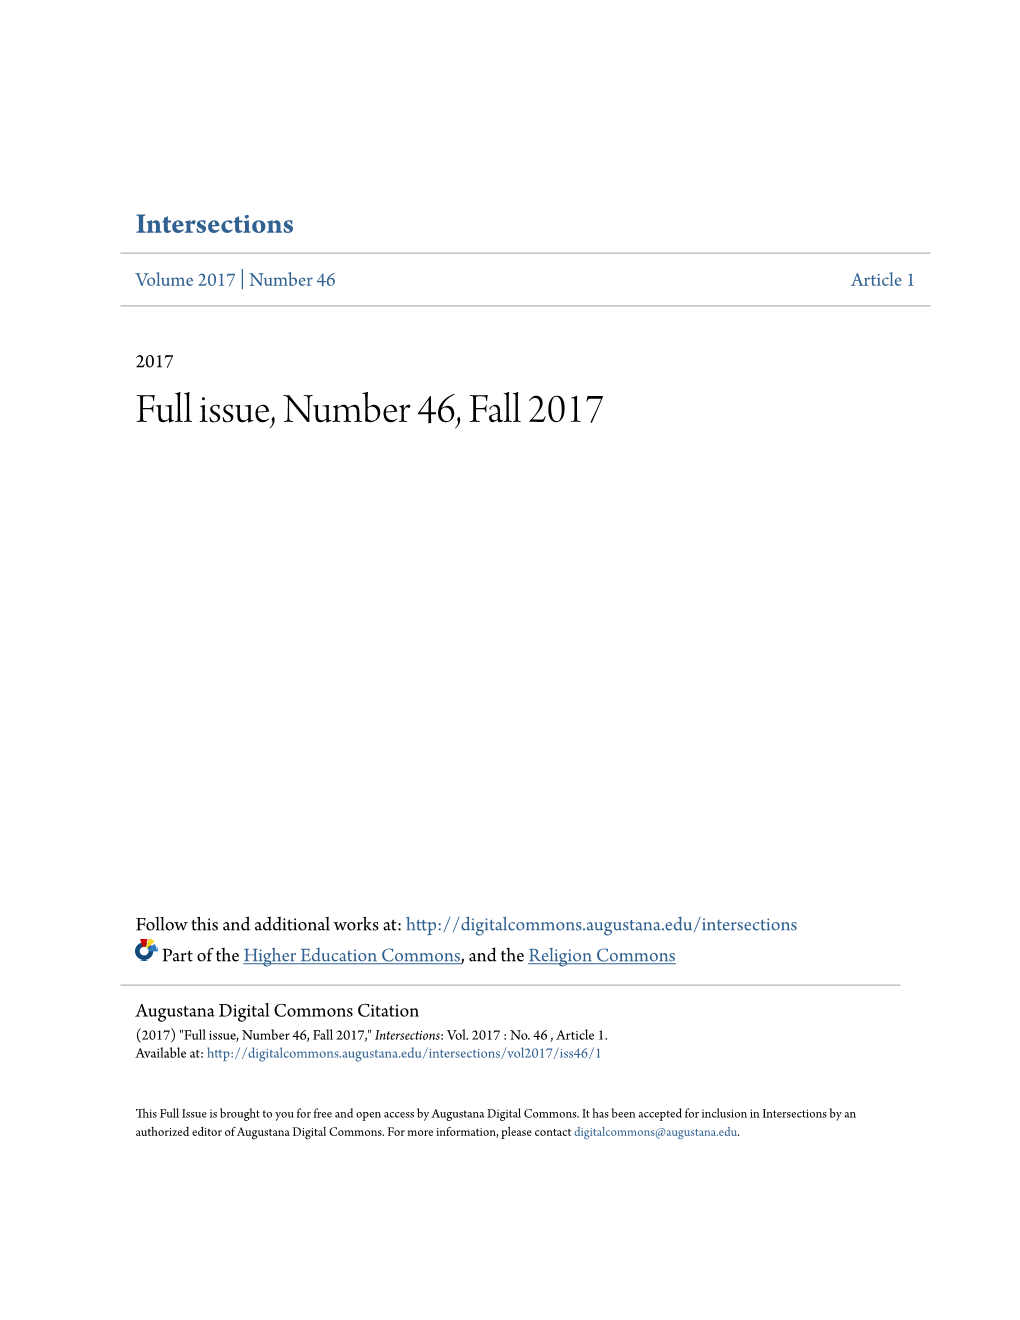 Full Issue, Number 46, Fall 2017